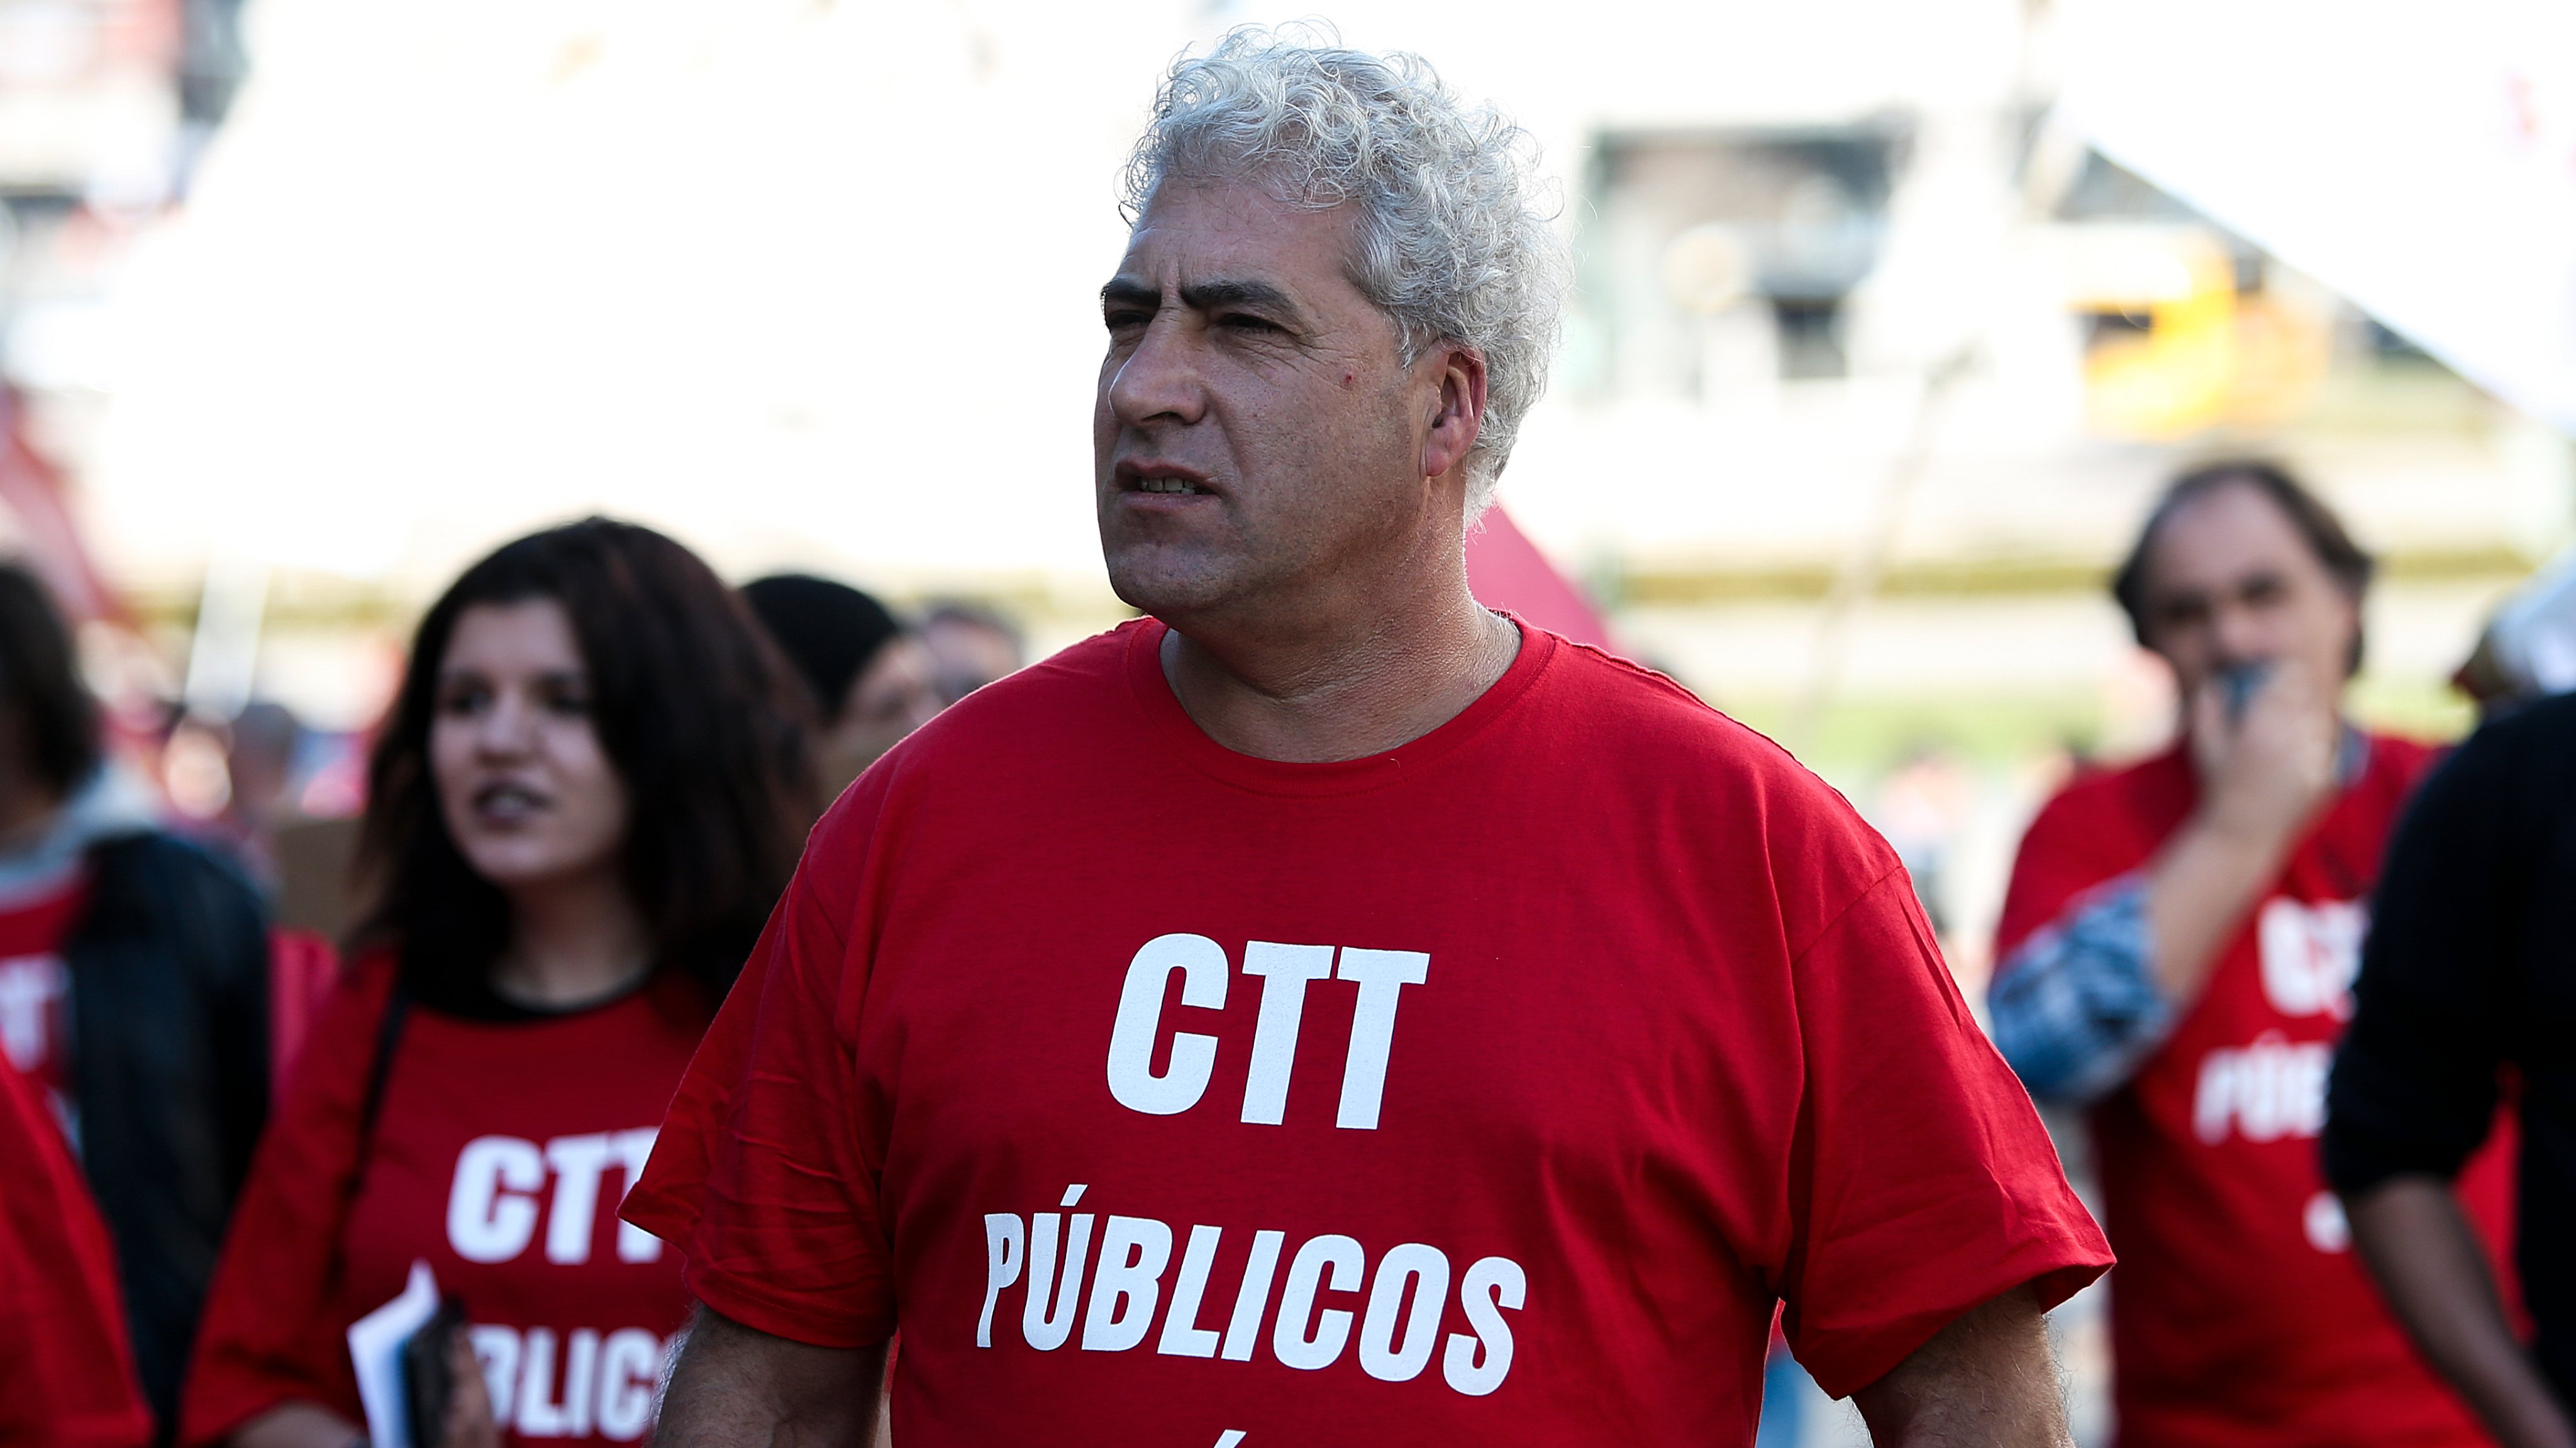 CTT workers protest in Lisbon